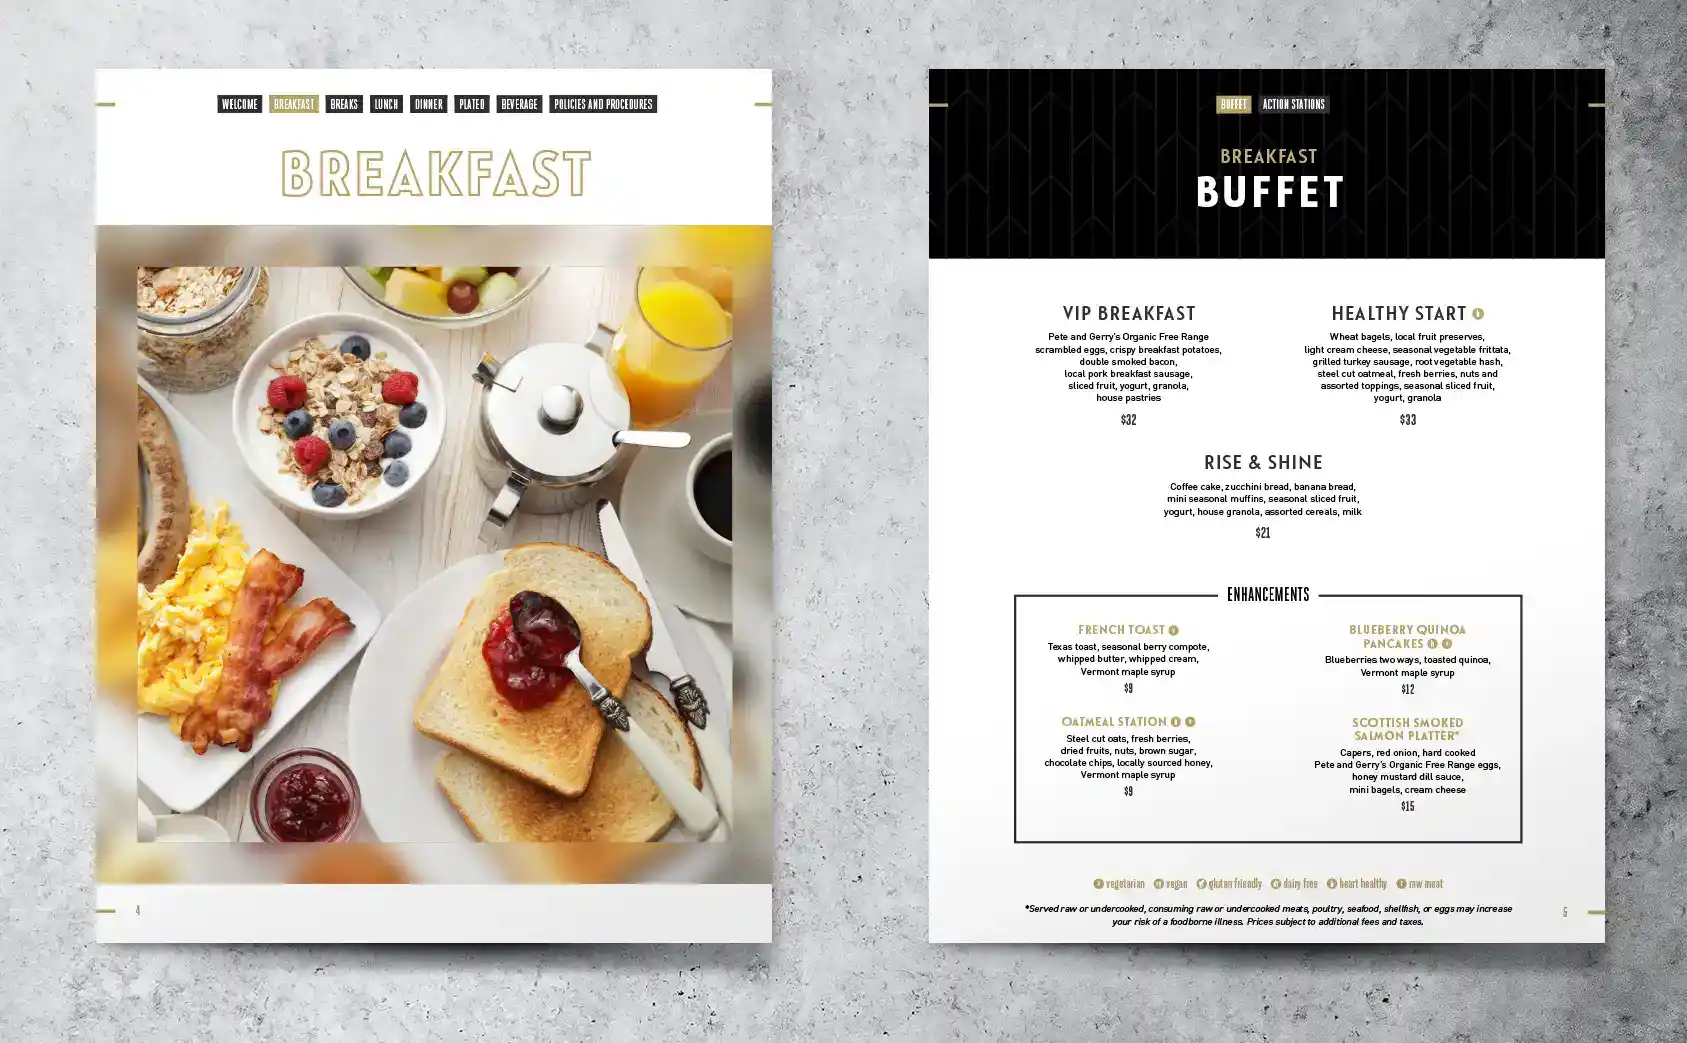 Two pages of the MGM menu no a grey background, breakfast and buffet pages.